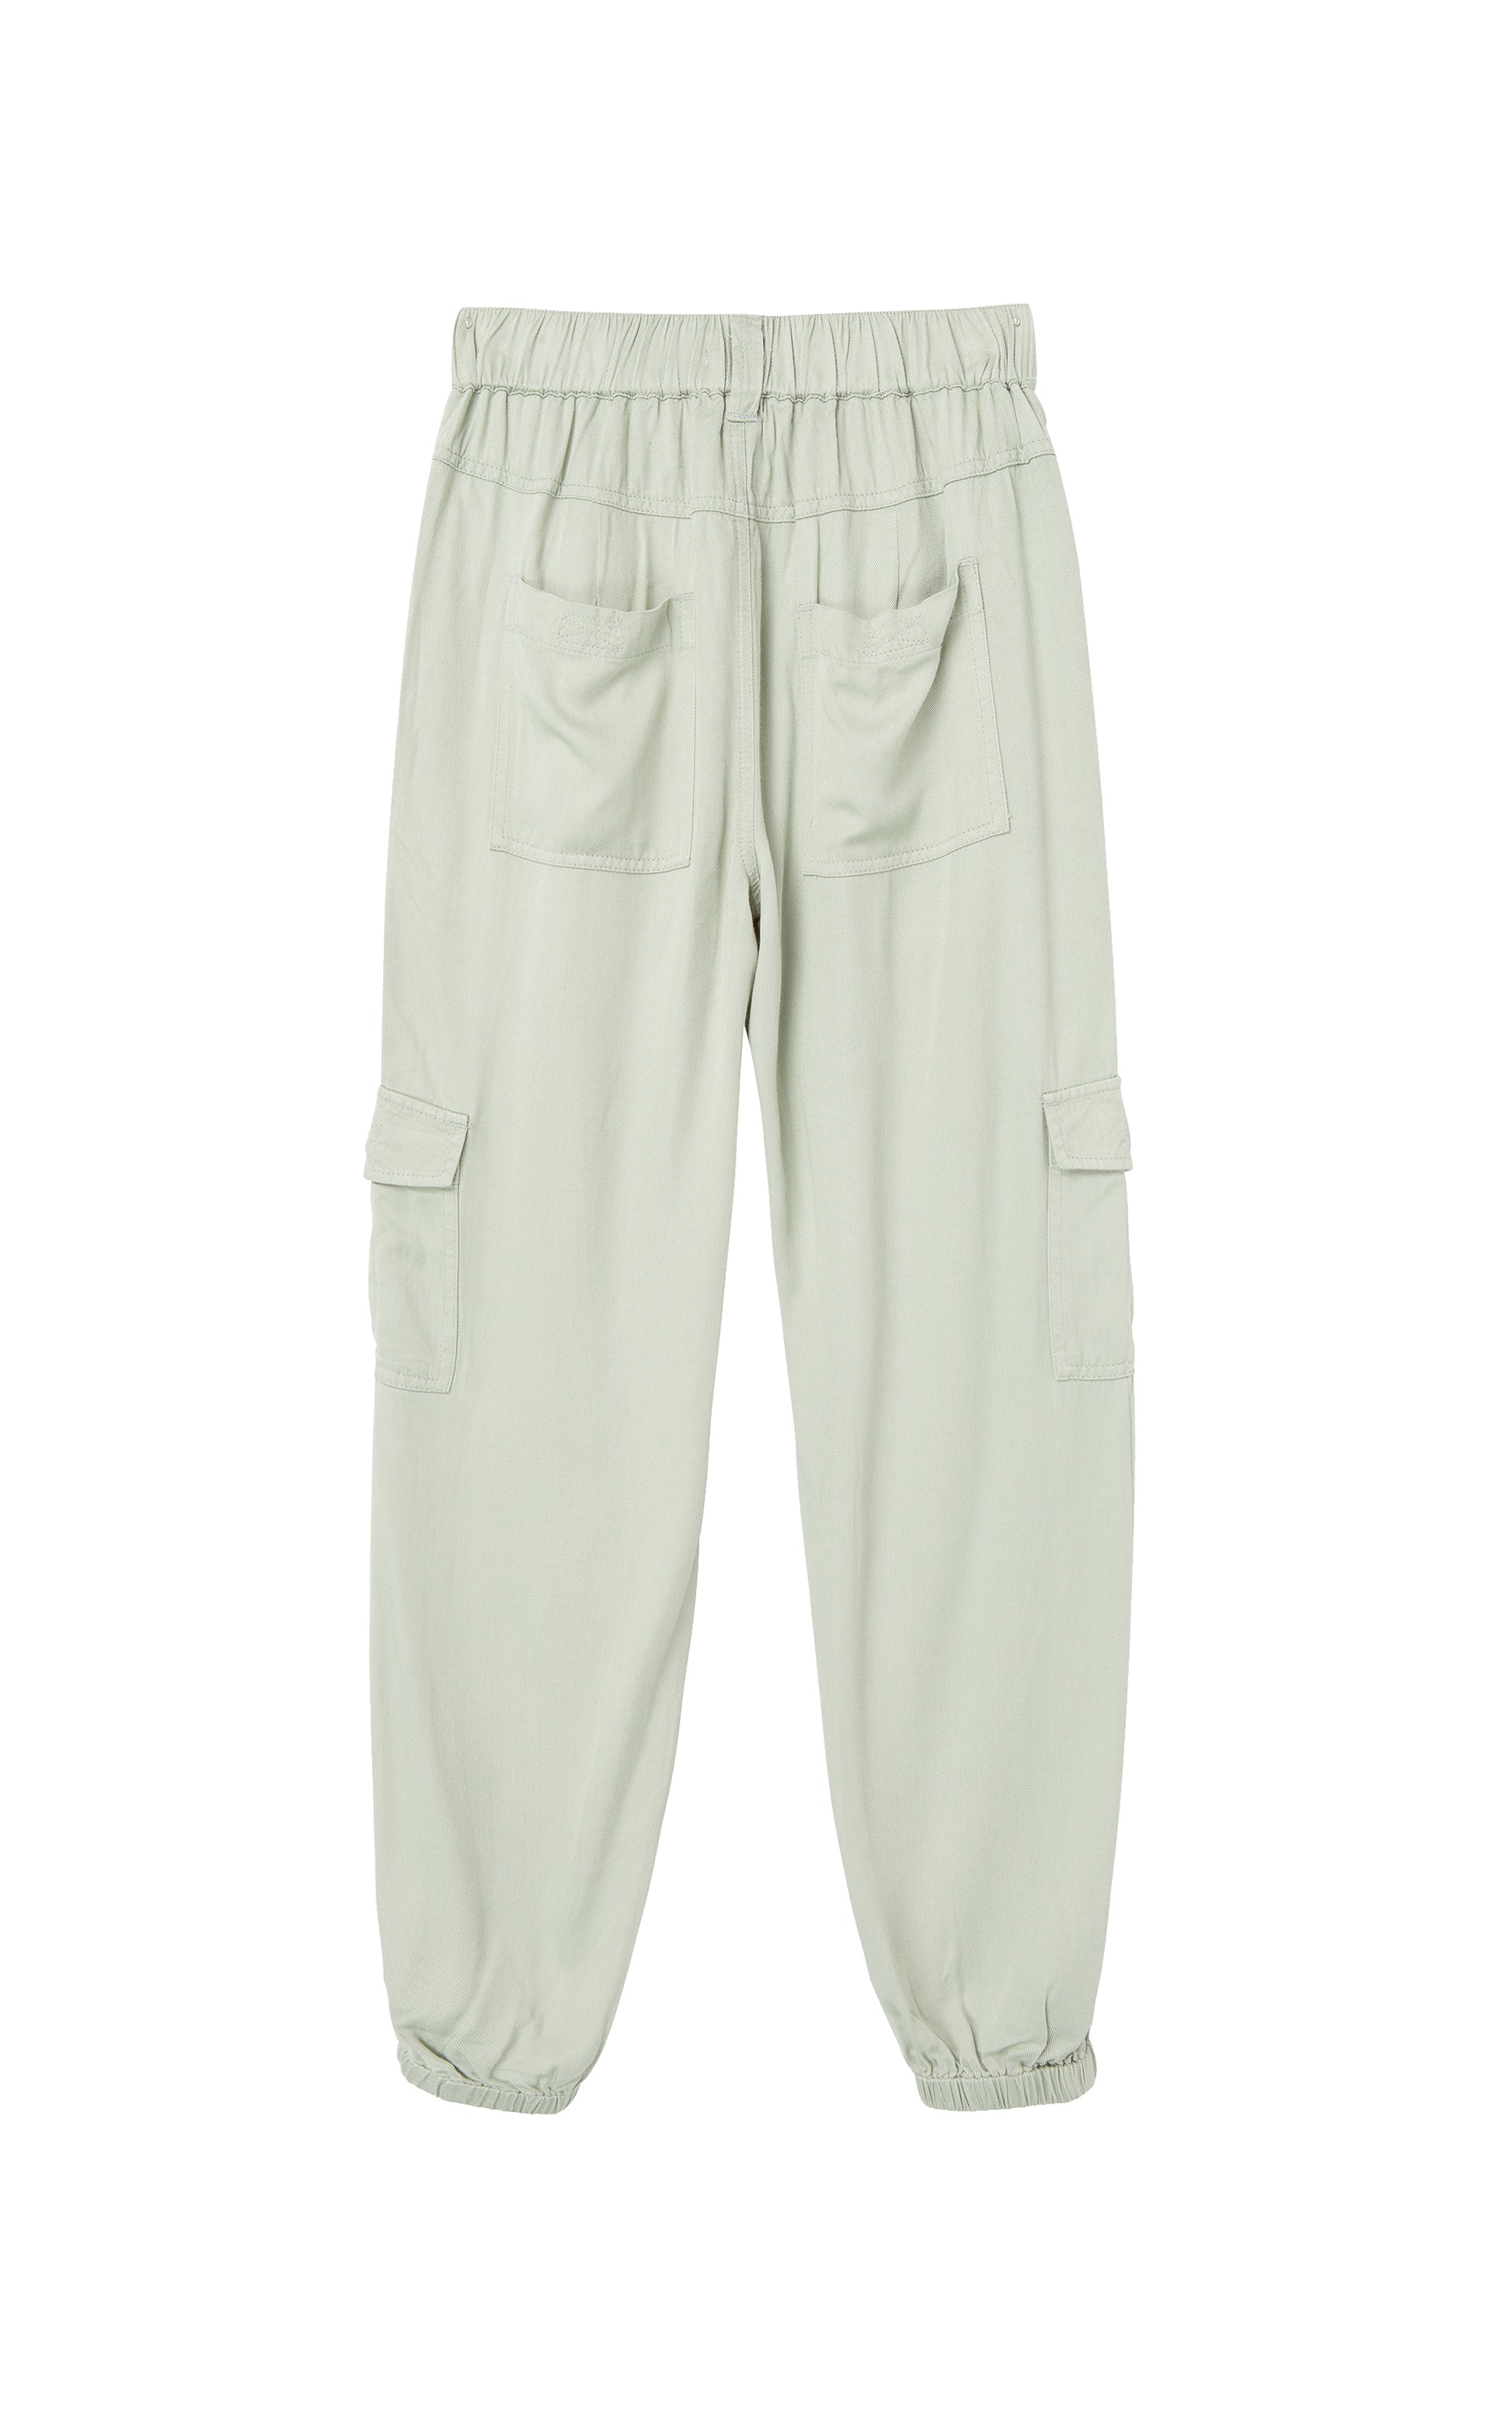 Back view of light green pants with cargo pockets, pleat accents, and elastic ankle cuffs. 